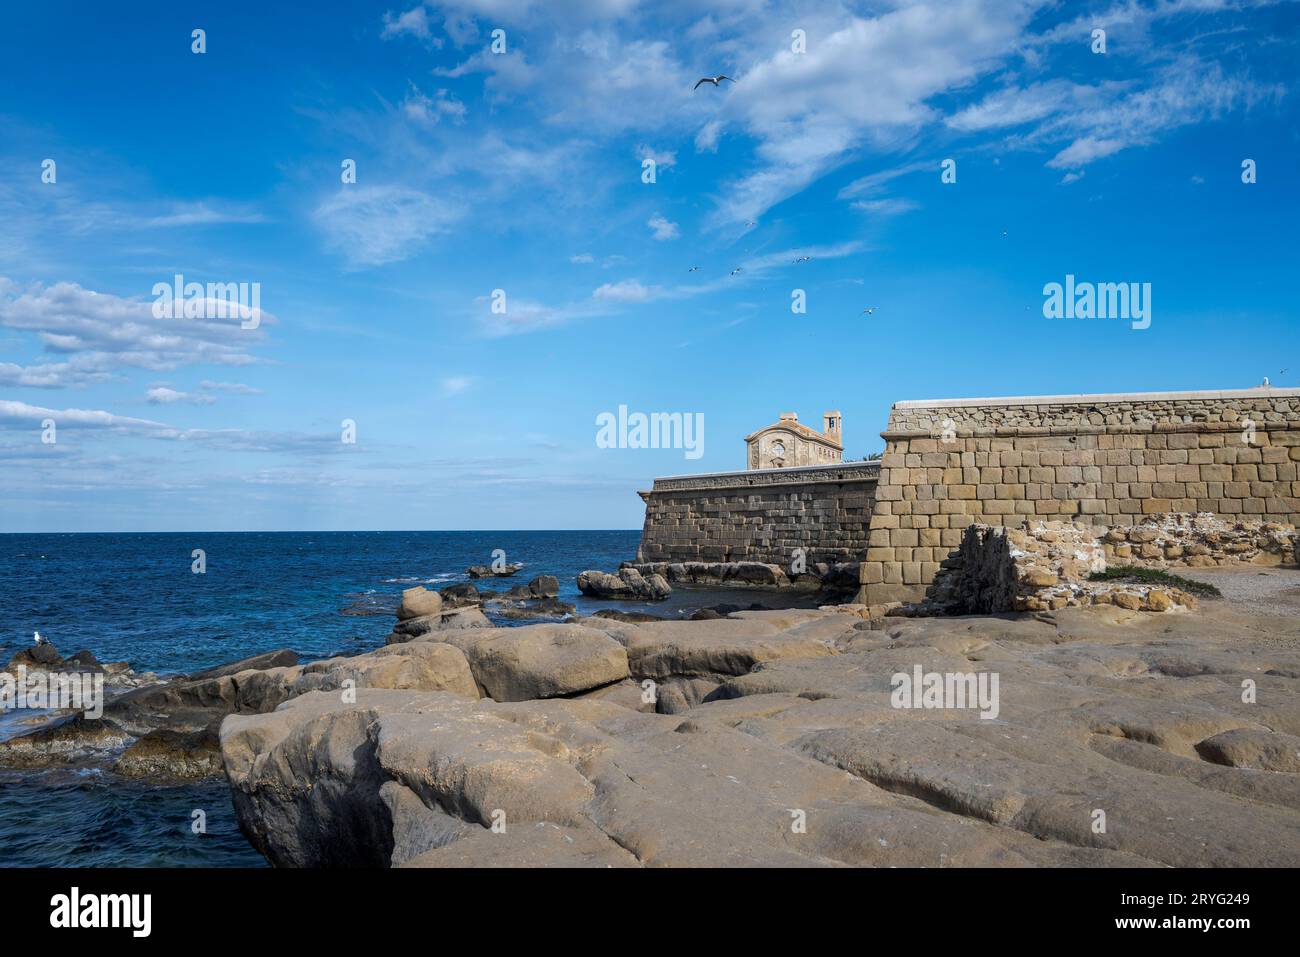 Old walls ant the church of San Pedro and San Pablo in the Tabarca Island, municipality of Alicante, Spain Stock Photo